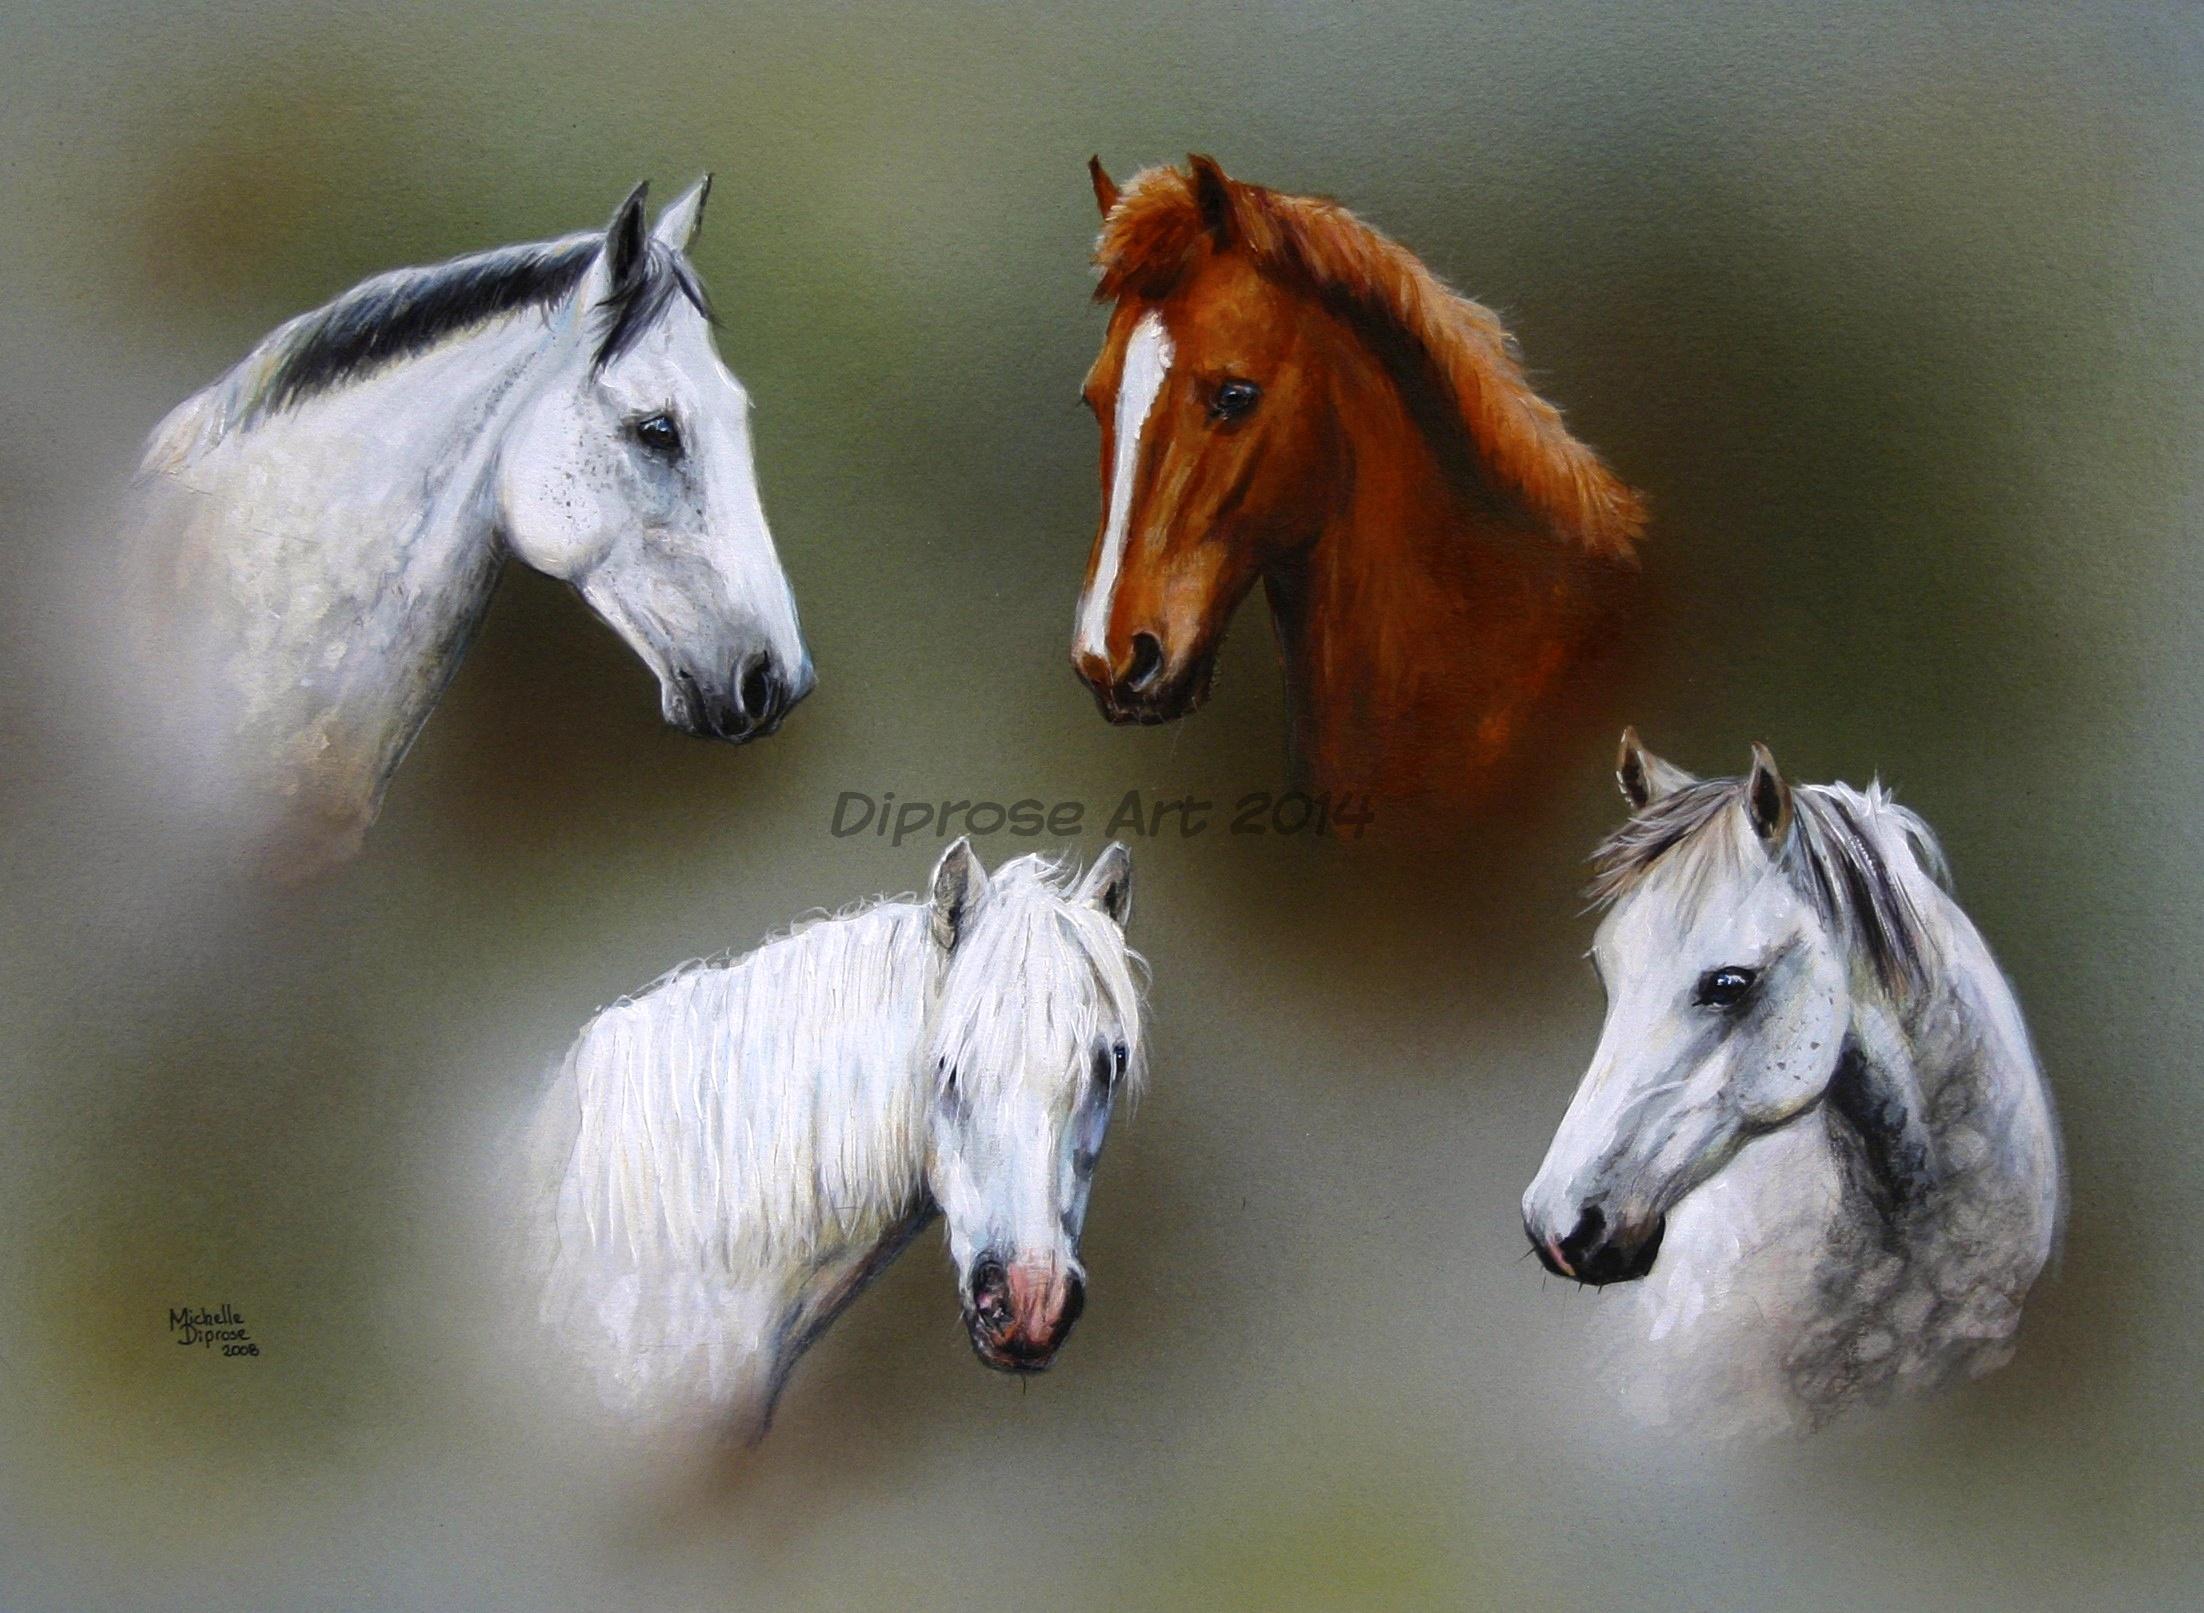 Acrylics on board - approx A2 - horse portraits - a horse is not just a horse - each has its own individual character which is why I find so interesting when doing group paintings.